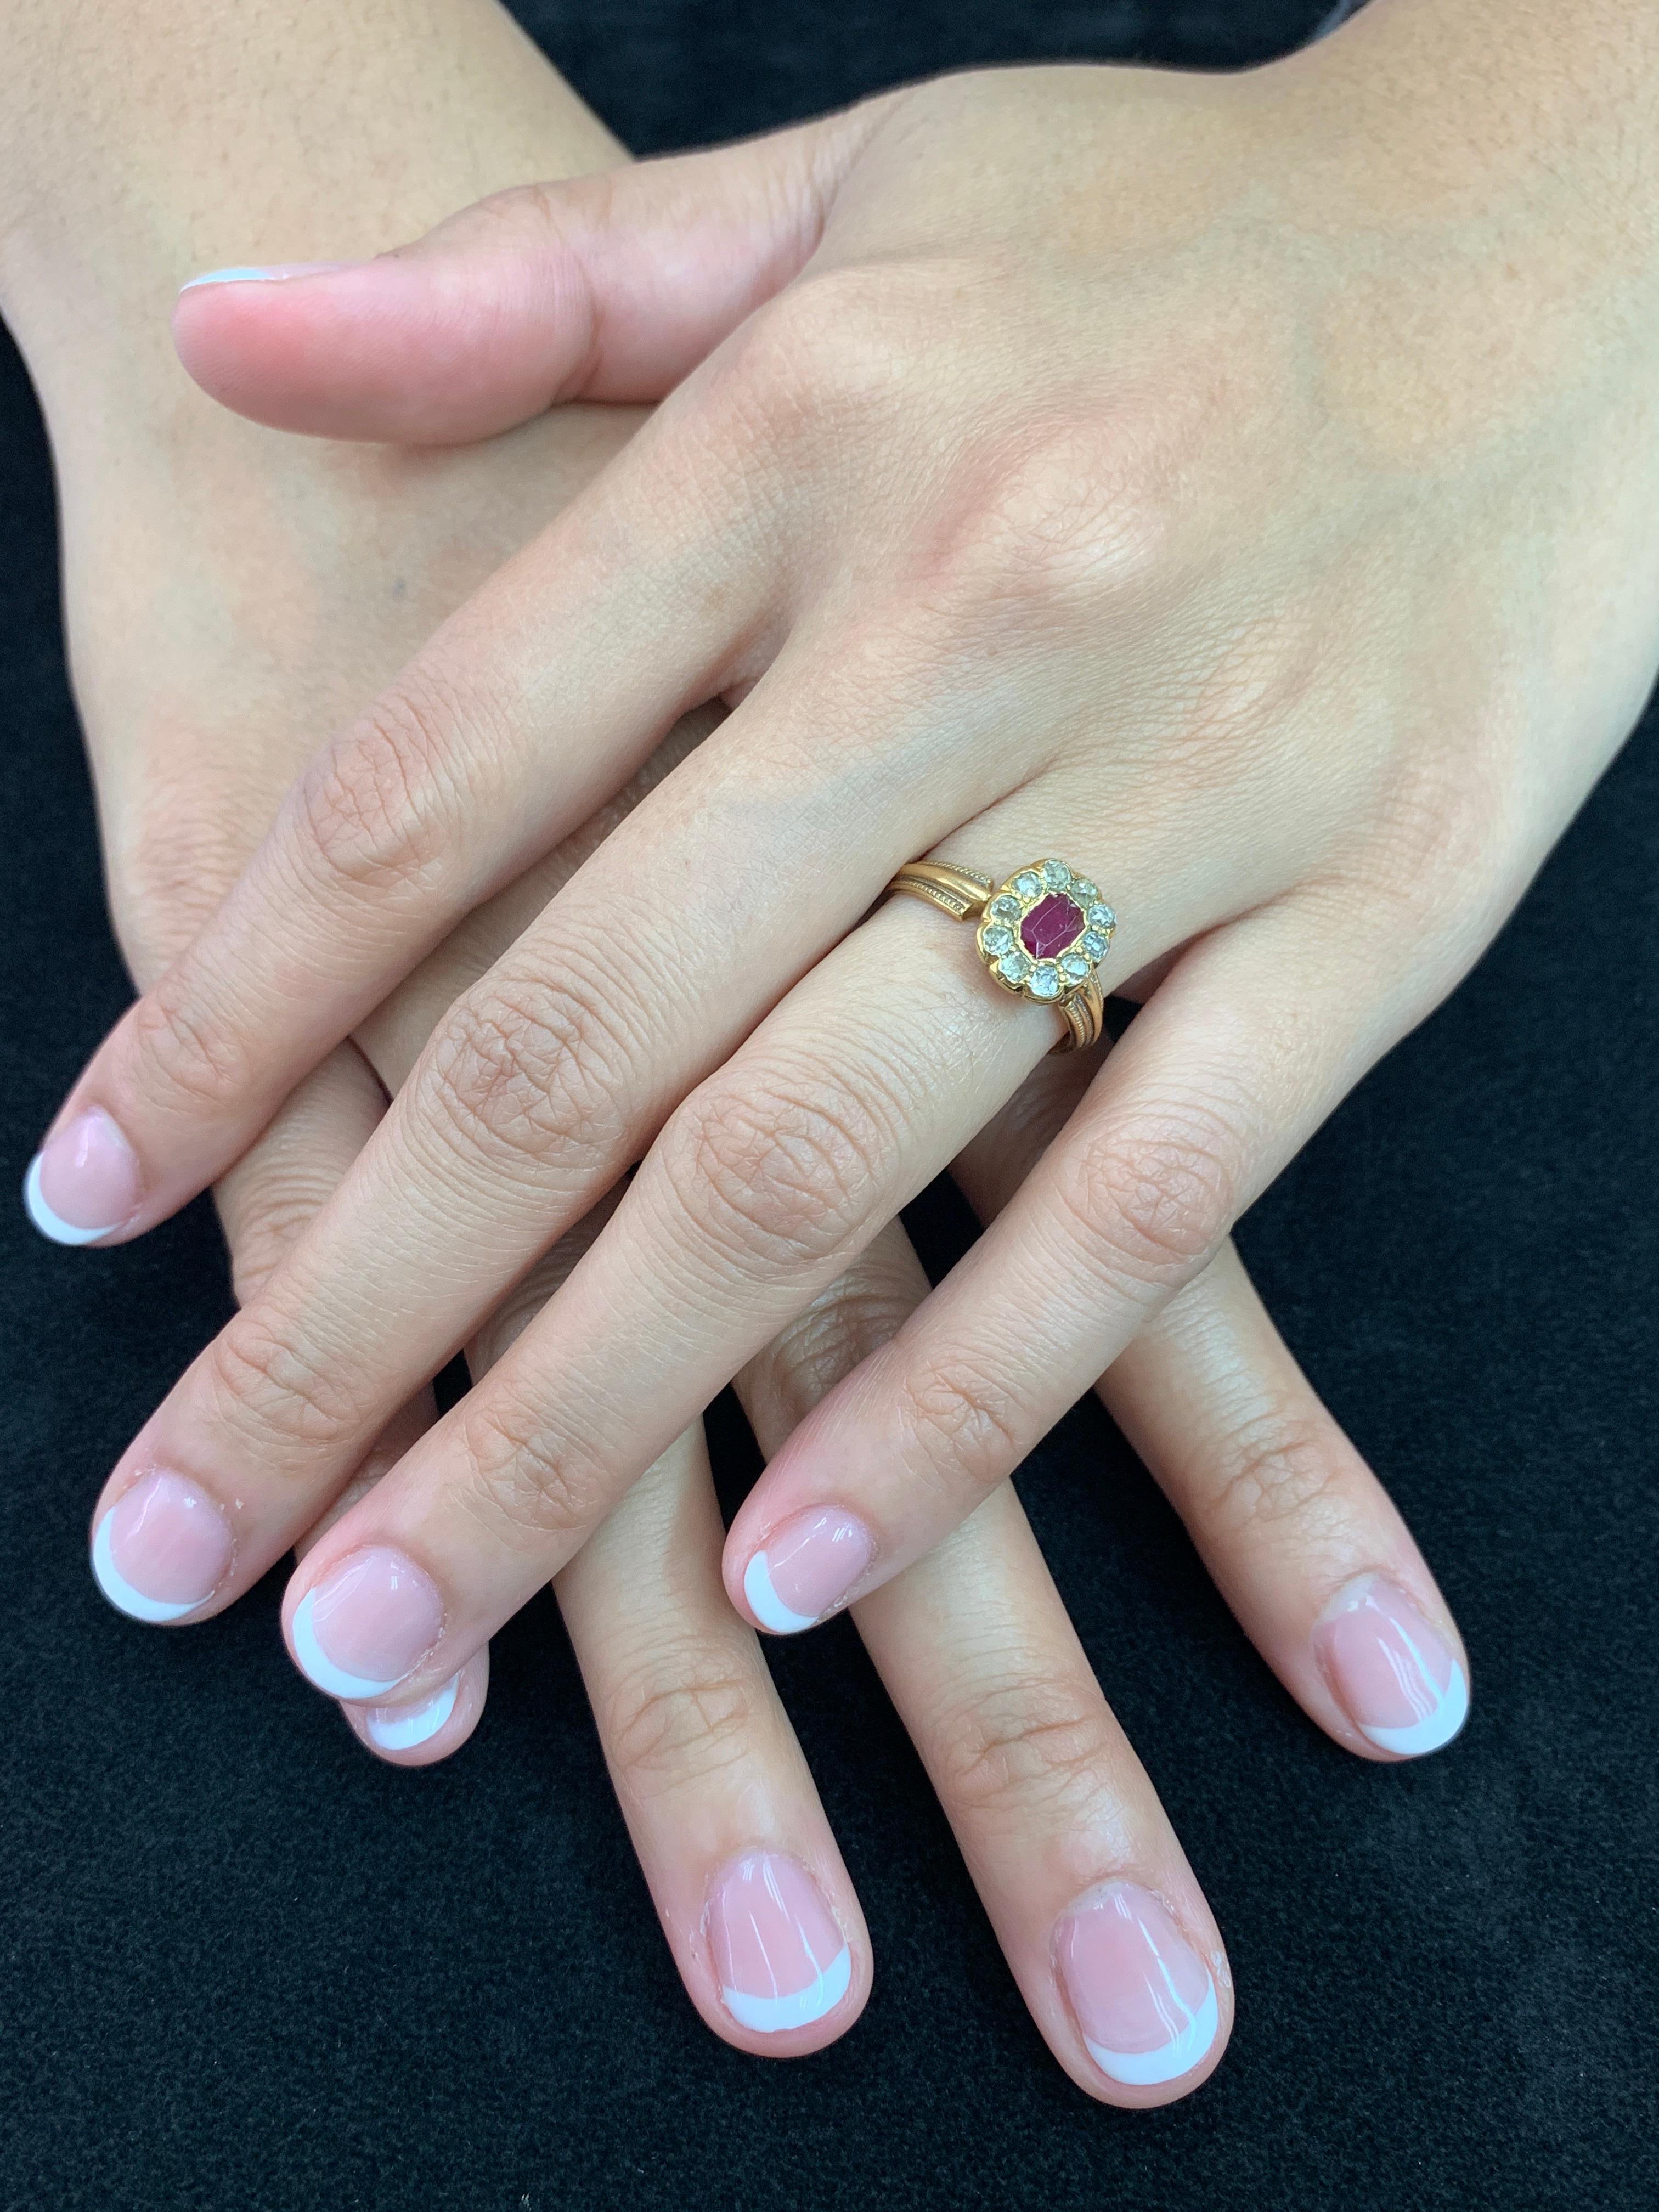 Here is a nice Burma Ruby and diamond ring. The ring is set in yellow gold and old mine cut diamonds. There are 10 old mine cut diamonds that surrounds the center ruby. This ruby ring is full of character. The workmanship of the gold work is simple